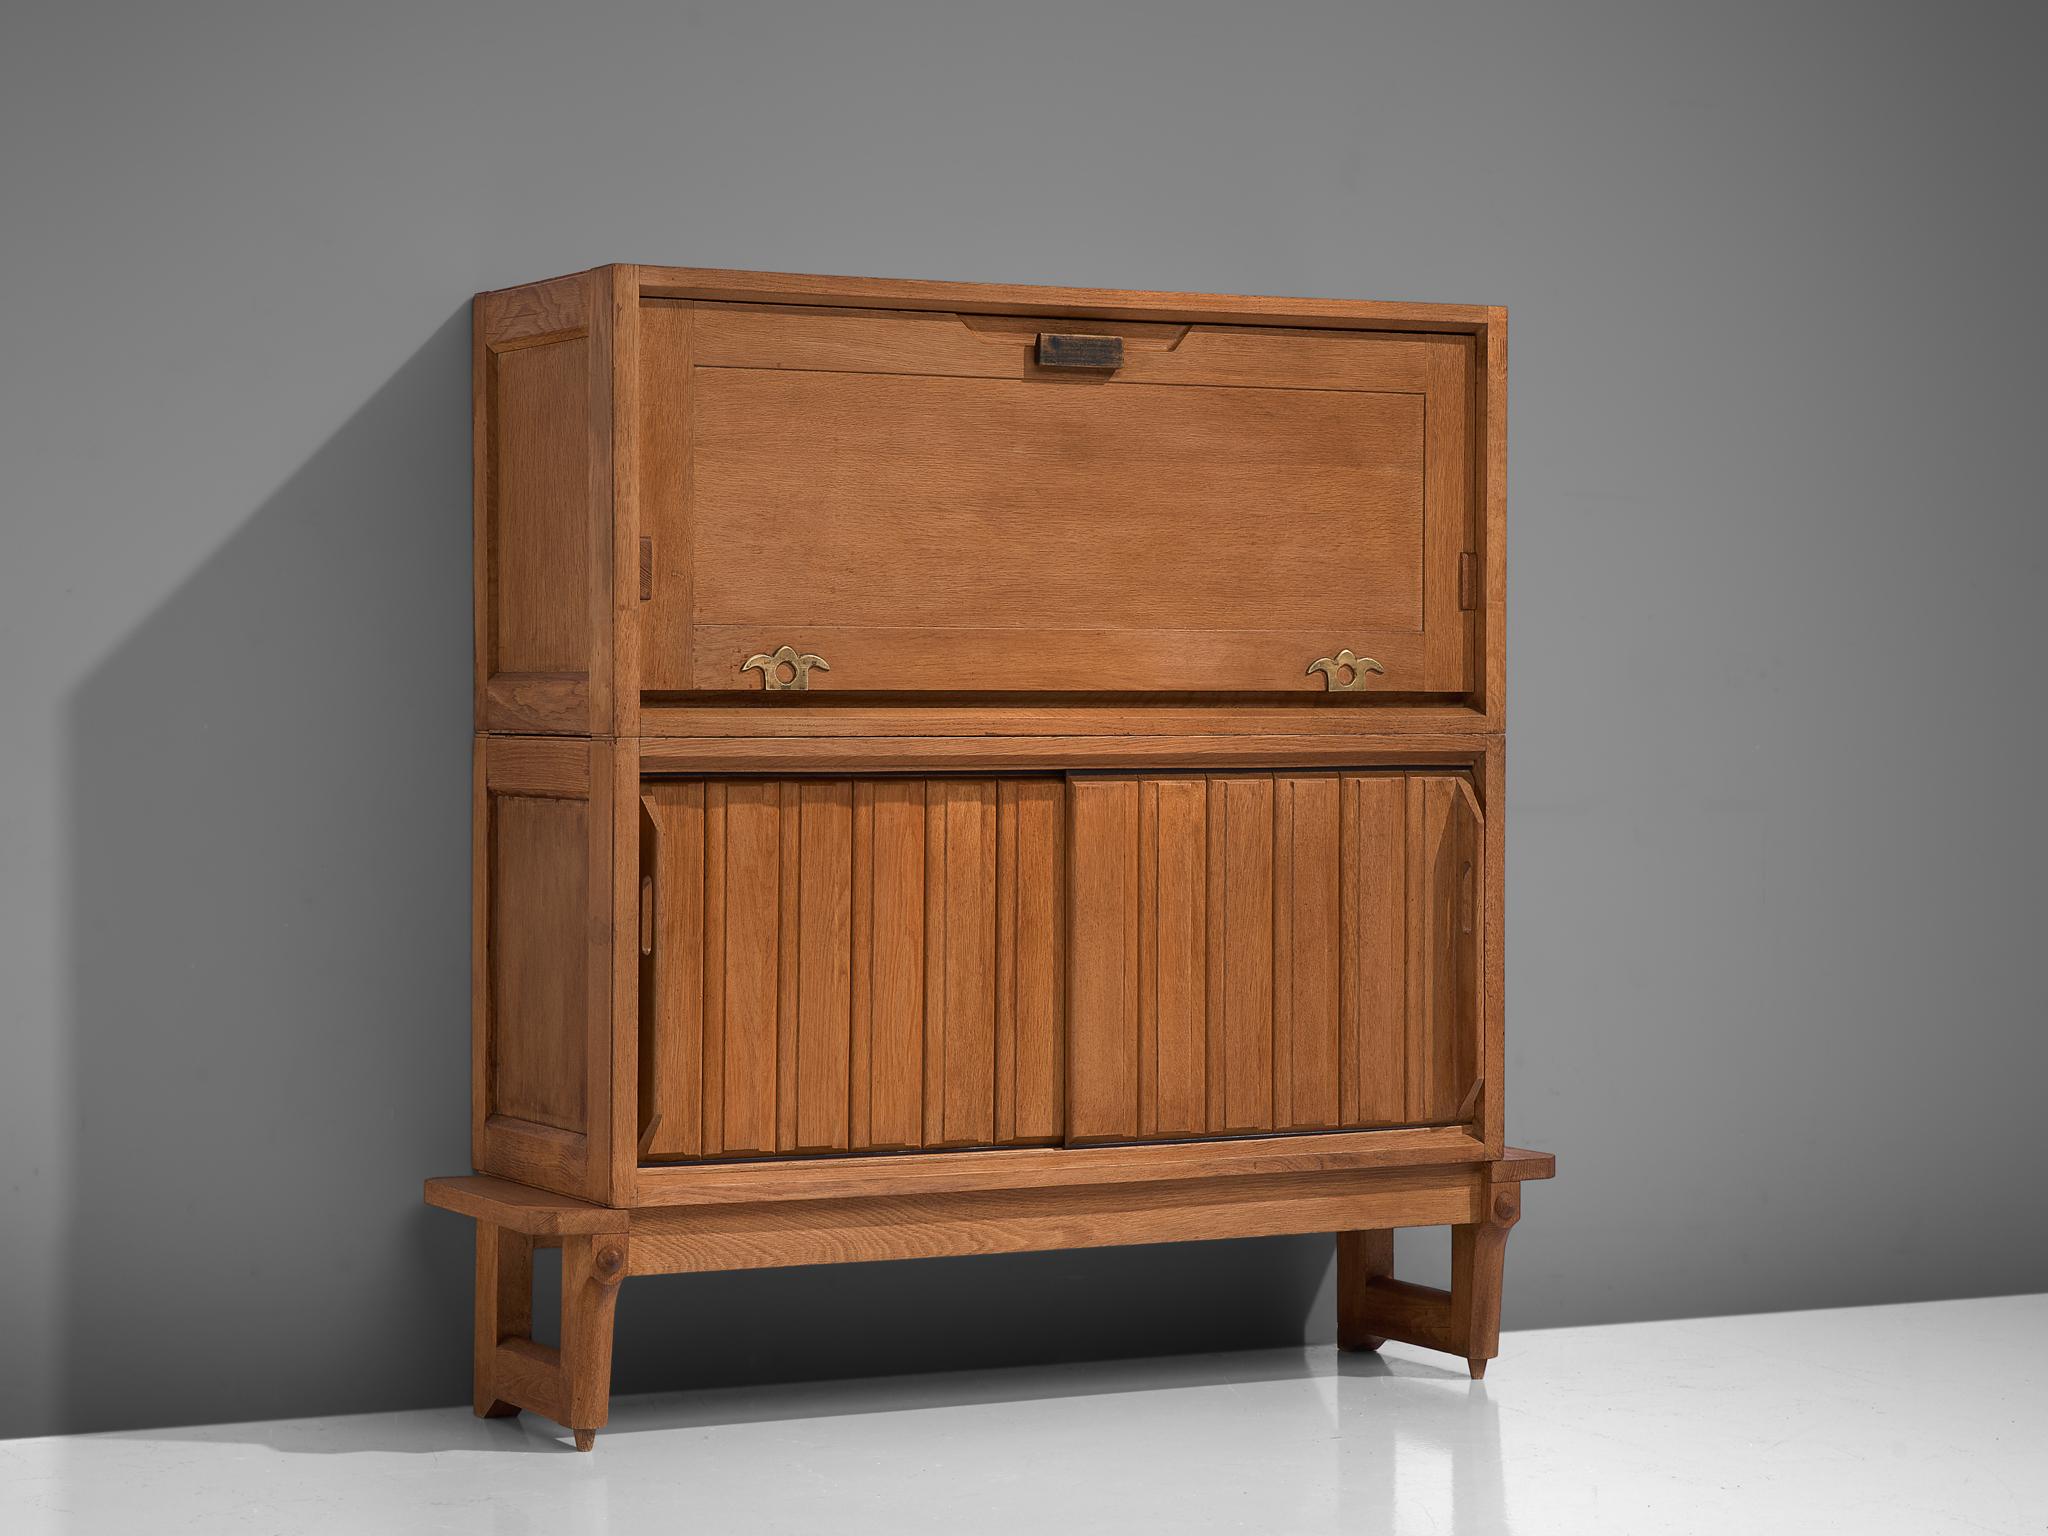 Guillerme and Chambron, high board, oak, France, 1950s

This sculptural cabinet is designed by the designer duo Guillerme and Chambron. The piece is executed in solid oak and consists of two large storage compartments, of which one opens from the